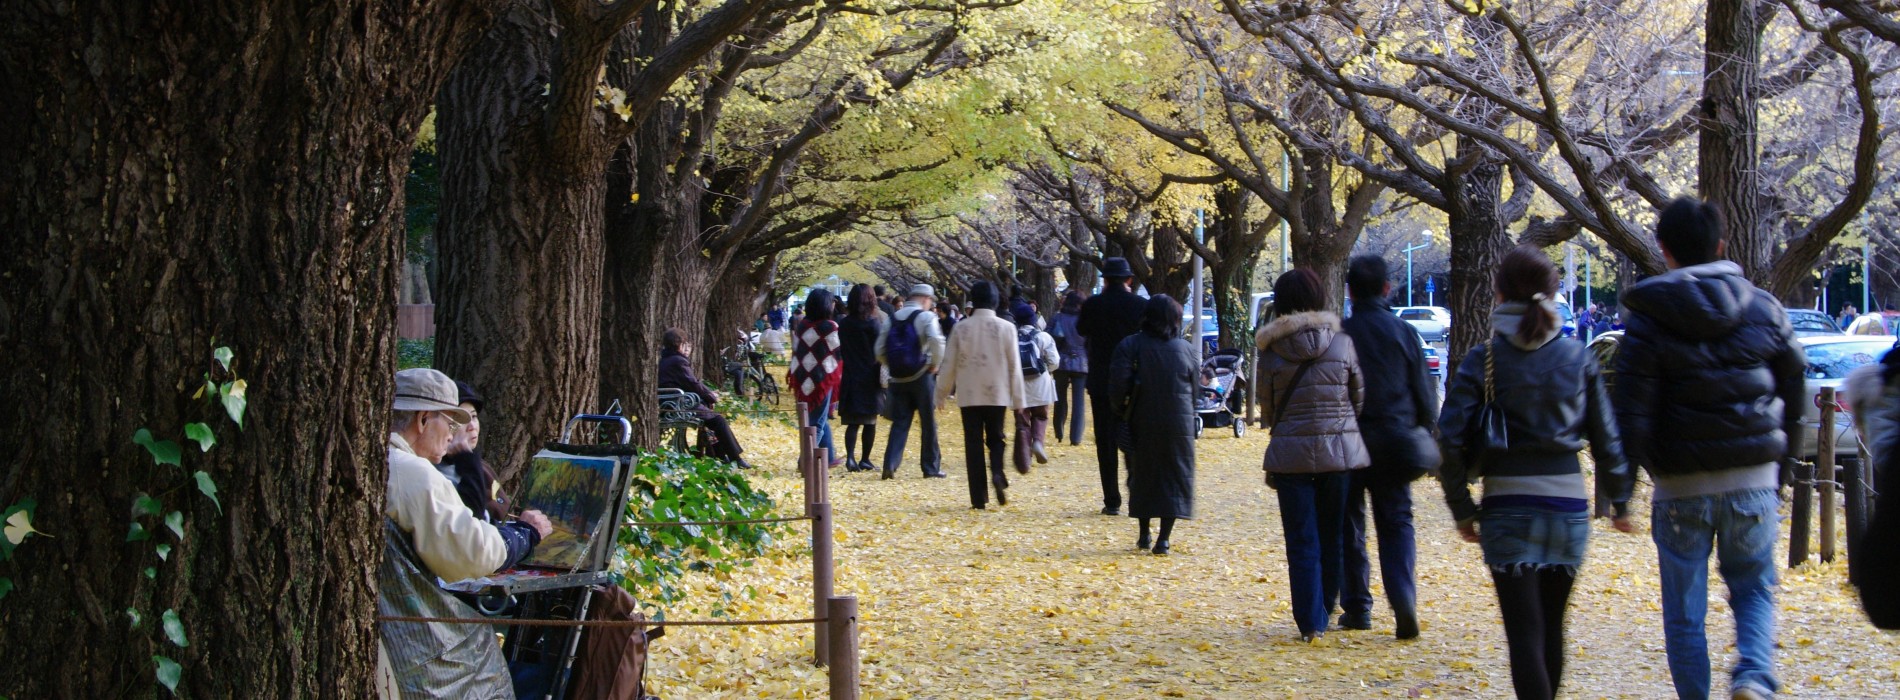 Fall in love with the very best of Autumn in Japan